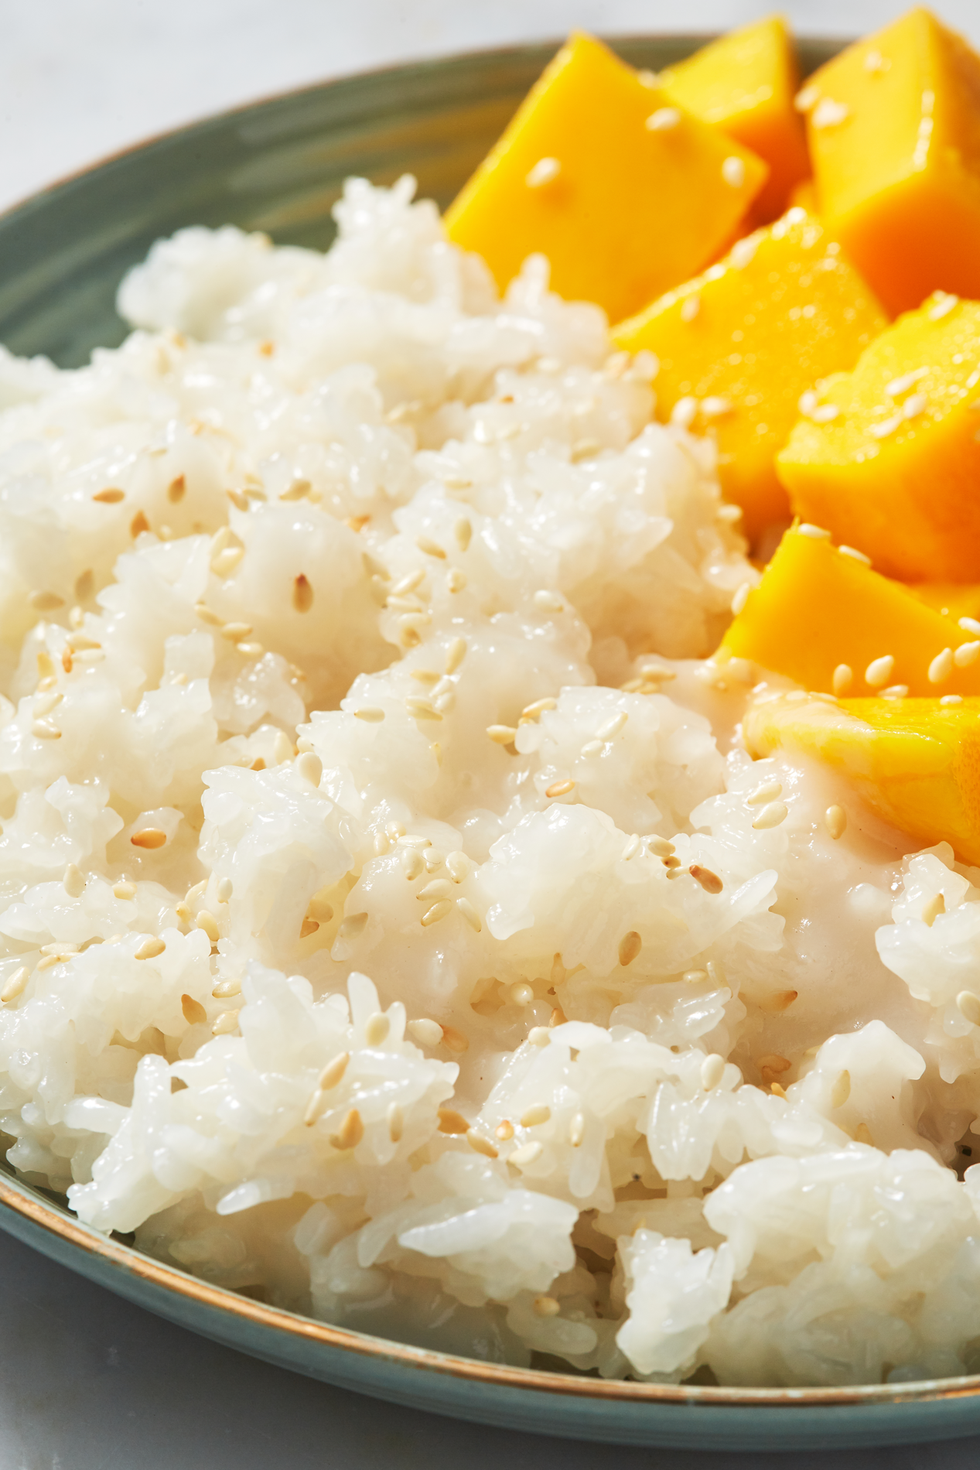 https://hips.hearstapps.com/hmg-prod/images/delish-190618-mango-sticky-rice-259-portrait-pf-1561646936.png?crop=0.9997369113391213xw:1xh;center,top&resize=980:*